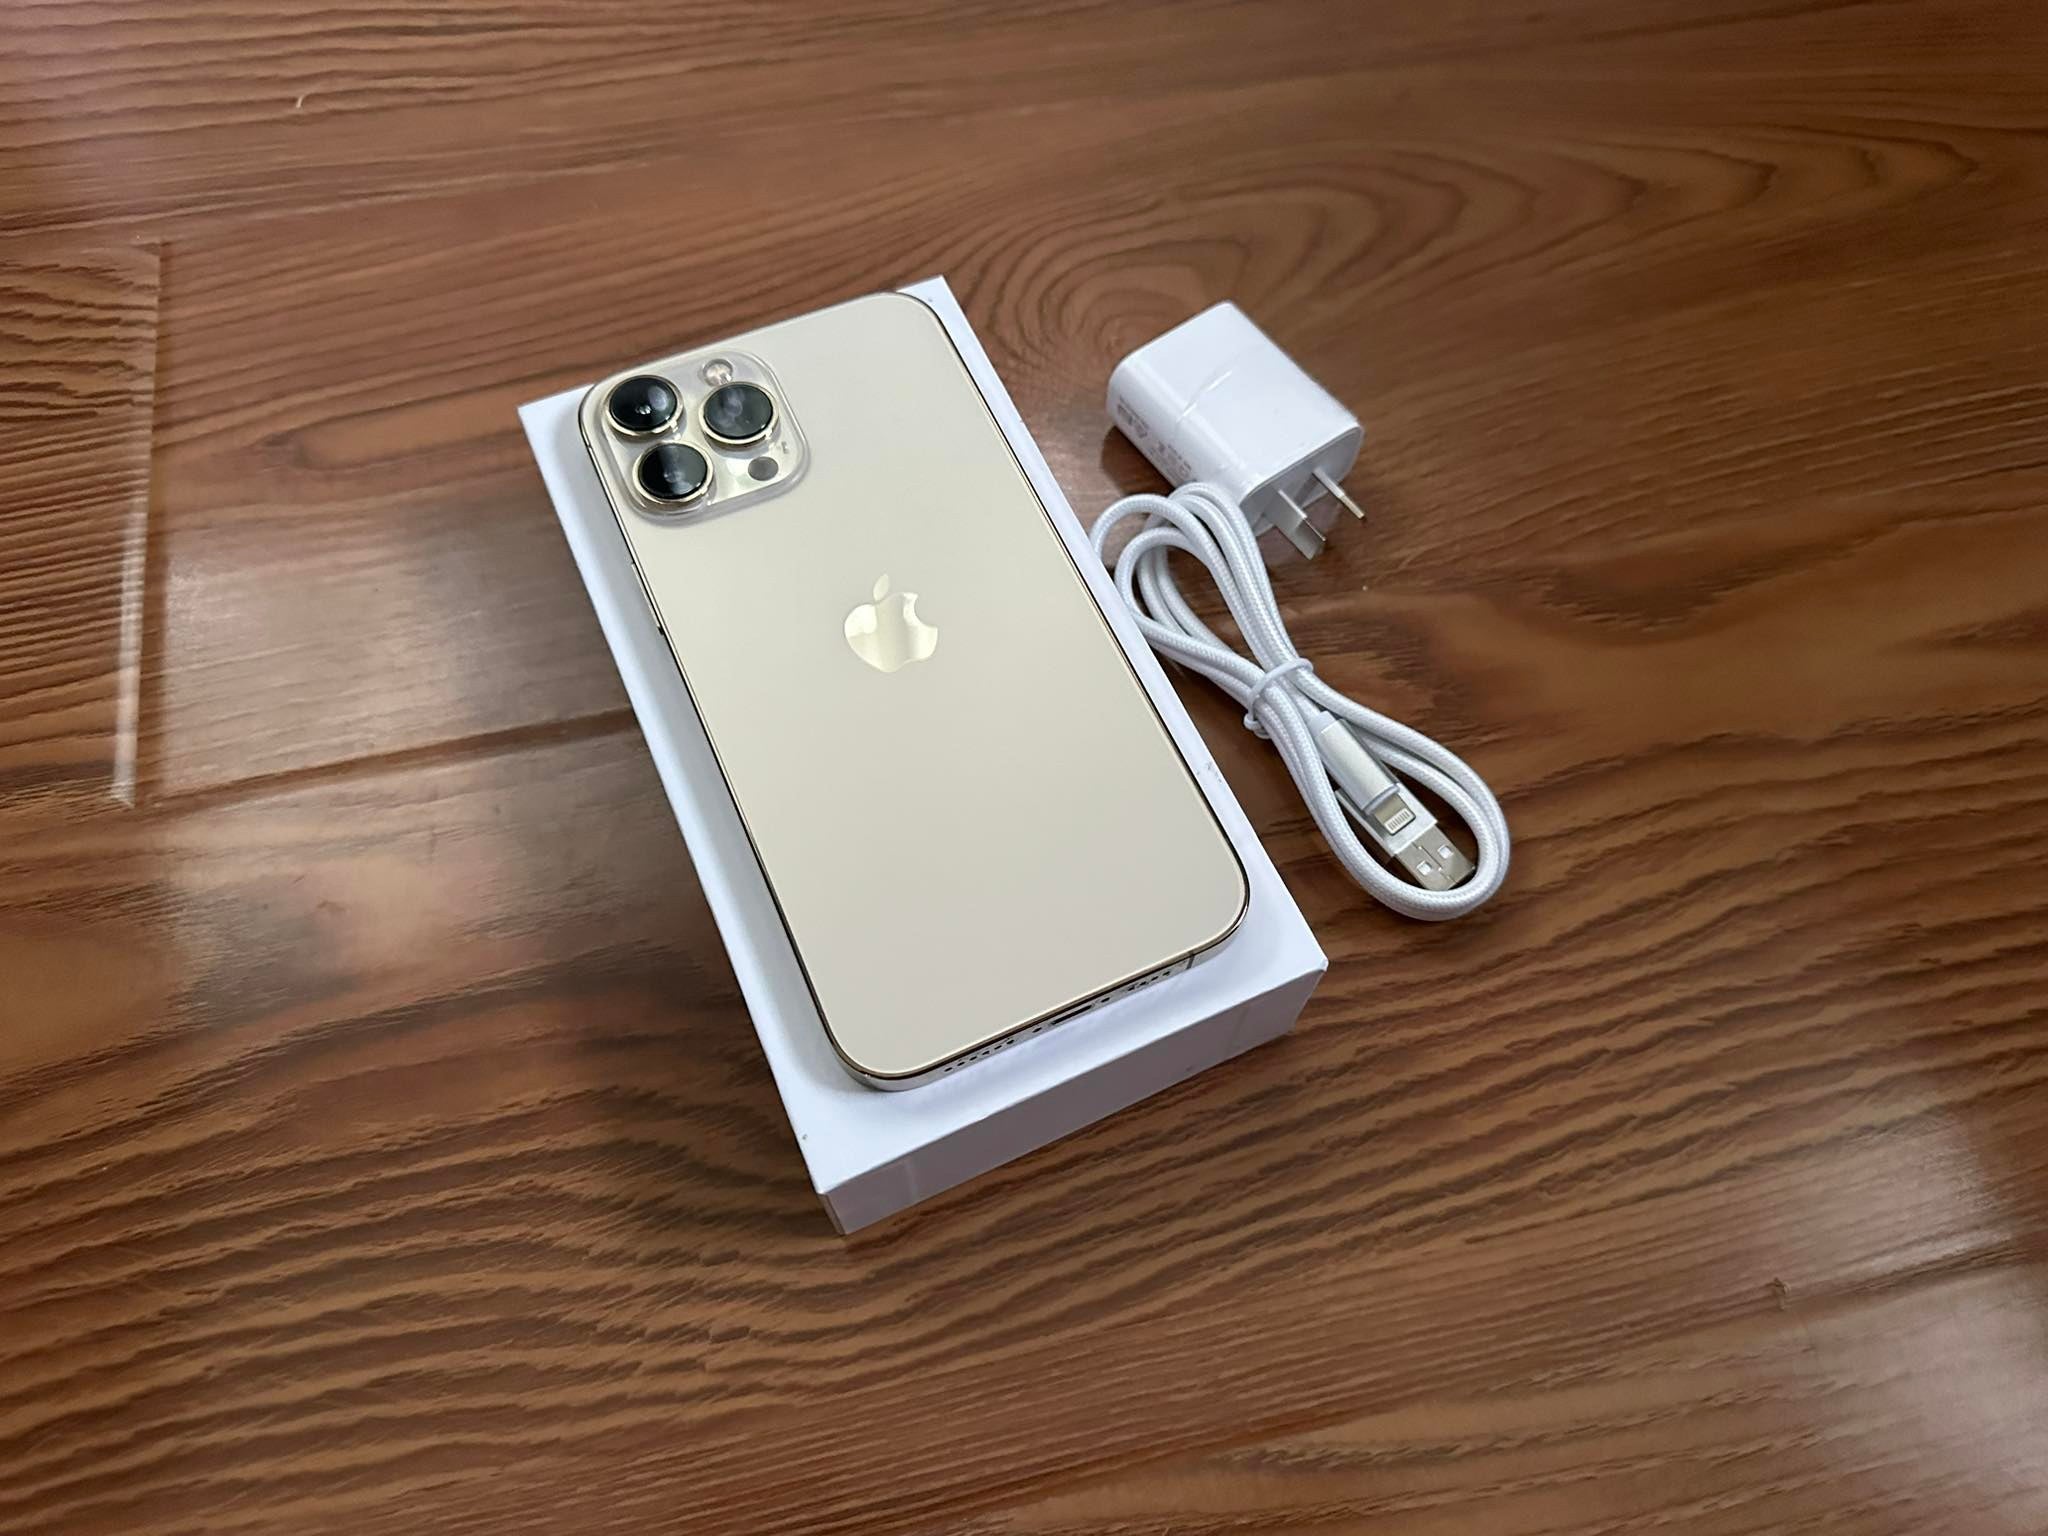 Apple iPhone 13 Pro Max 128GB 5G Gold Dual Sim (Excellent) New Battery, Case, Glass Screen Protector & Shipping